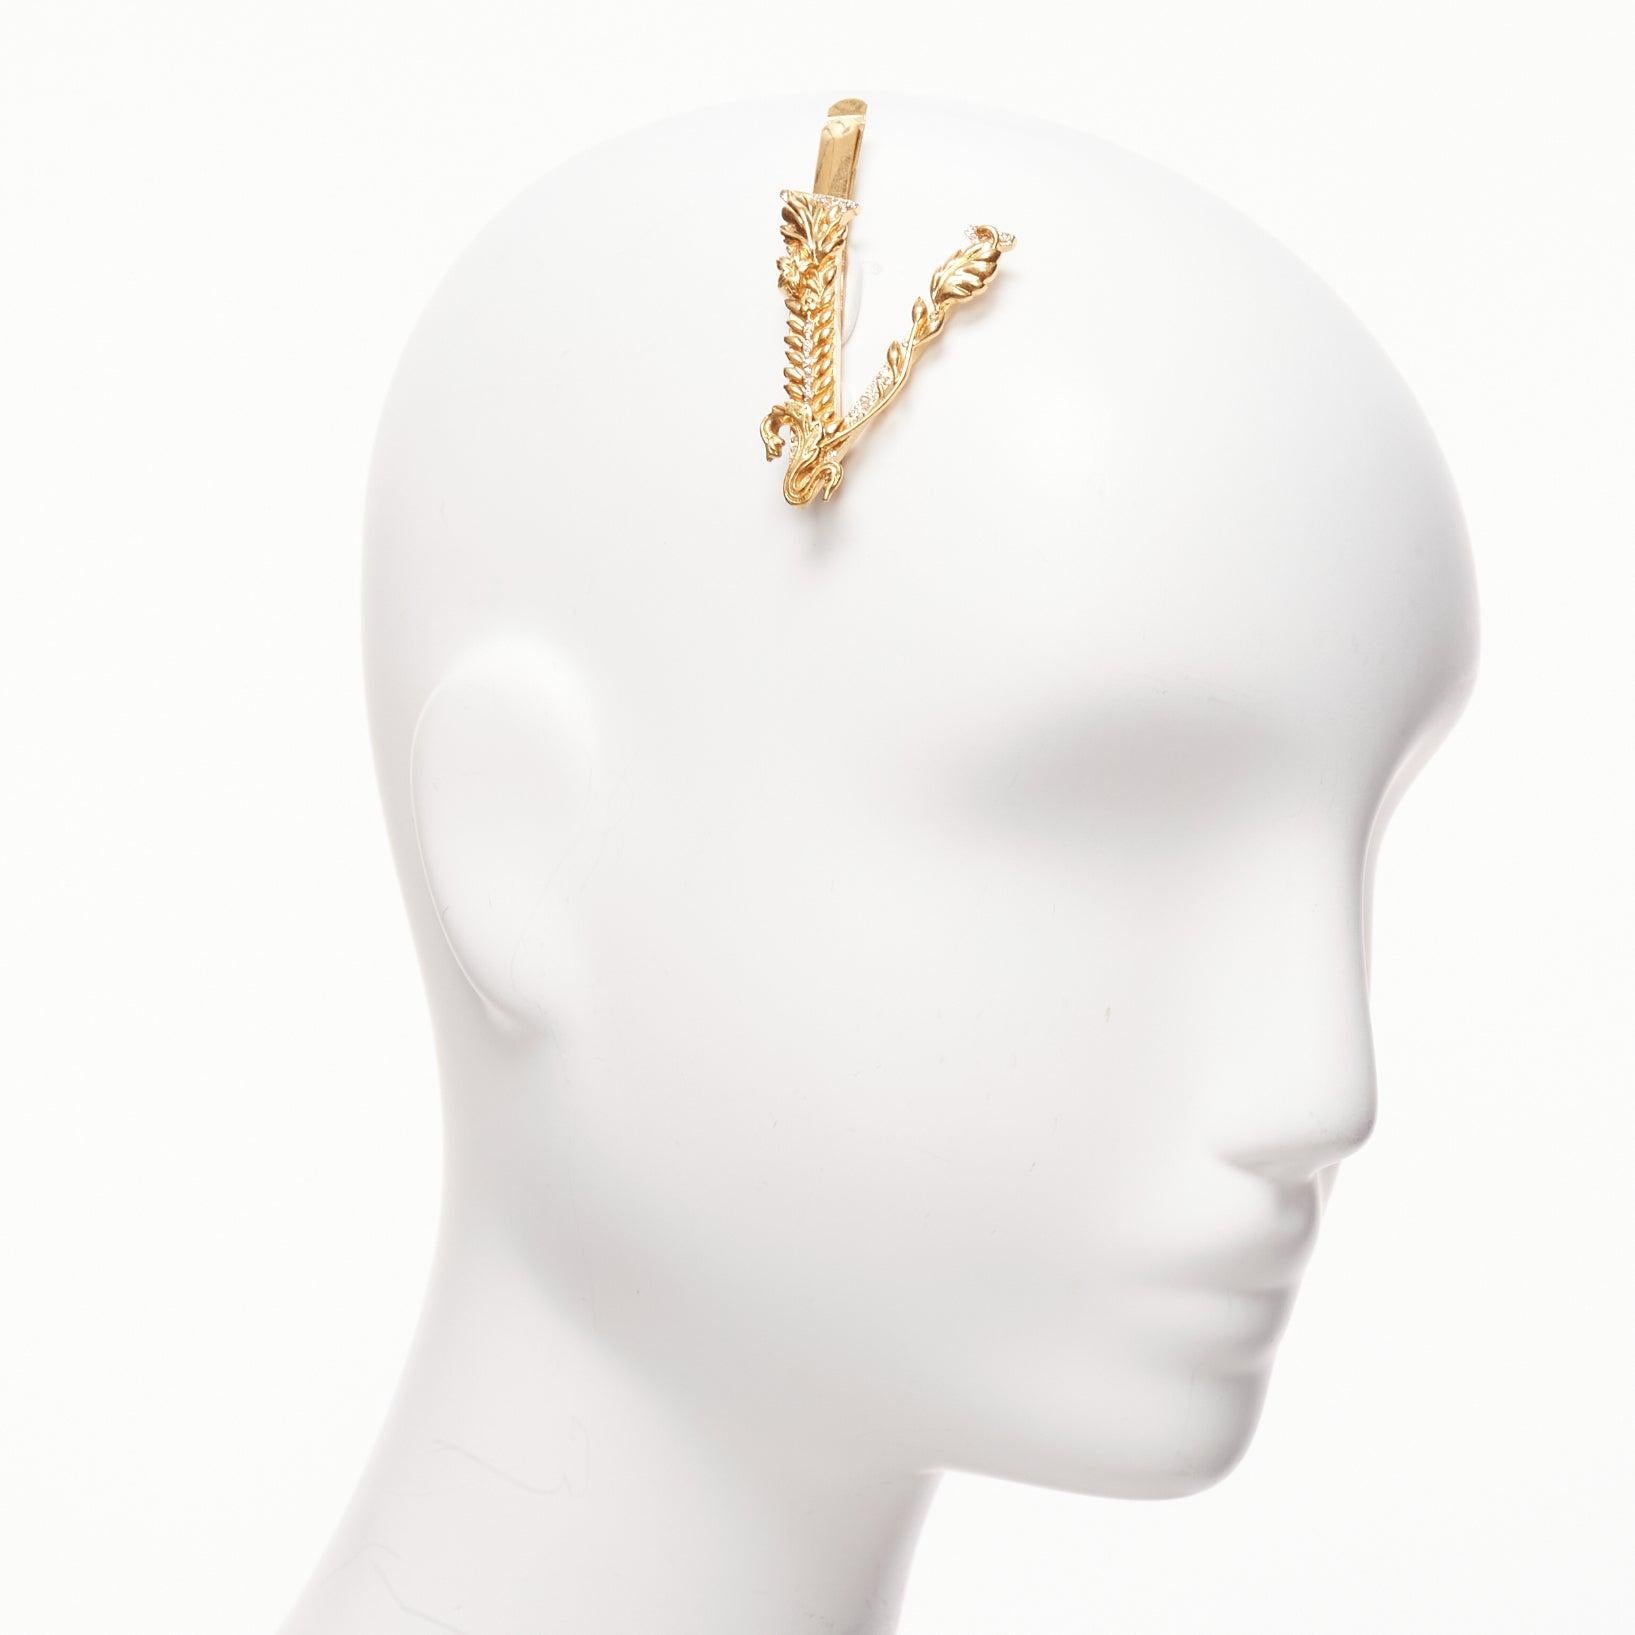 VERSACE Virtus gold baroque big V logo baroque single hair clip
Reference: AAWC/A01006
Brand: Versace
Designer: Donatella Versace
Model: Virtus
Material: Metal
Color: Gold, Clear
Pattern: Crystals
Closure: Clip On
Lining: Gold Metal
Extra Details: